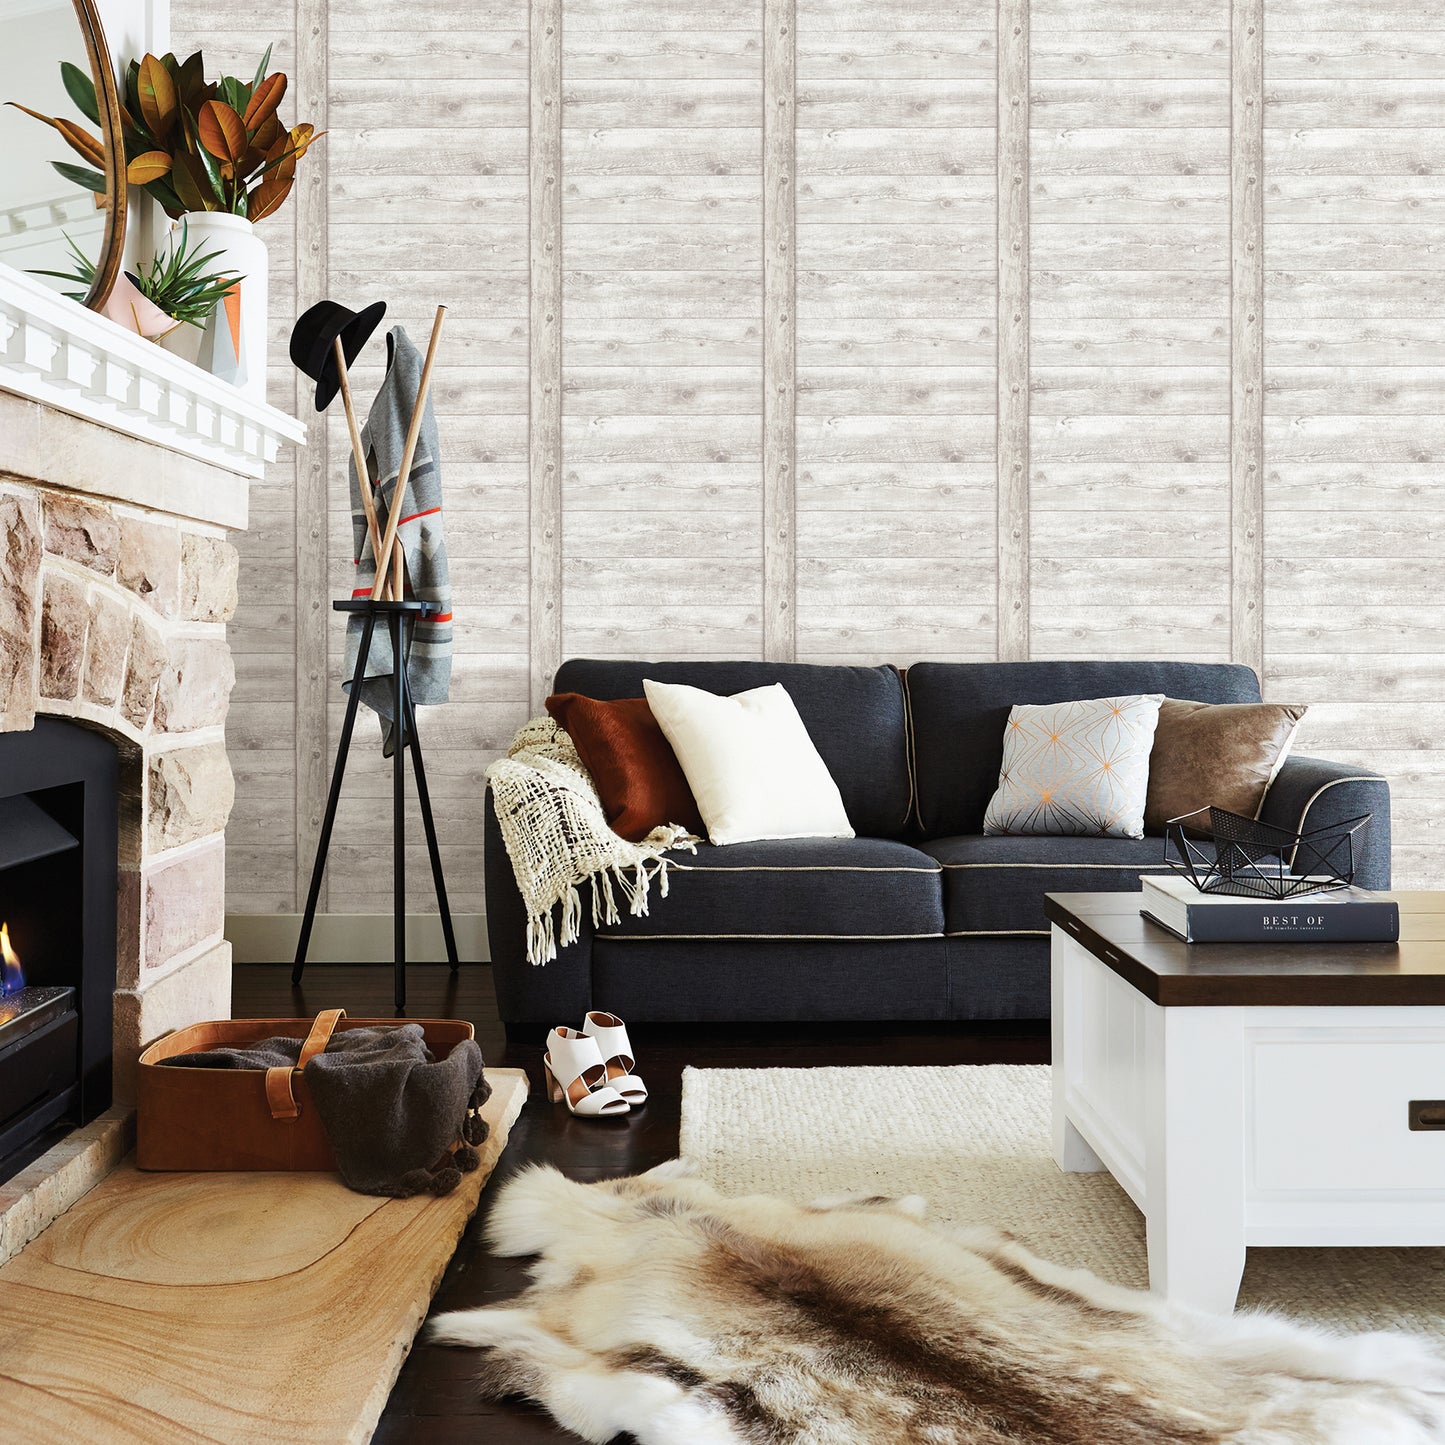 Acquire 2774-861402 stones woods whites off whites wood paneling wallpaper advantage Wallpaper